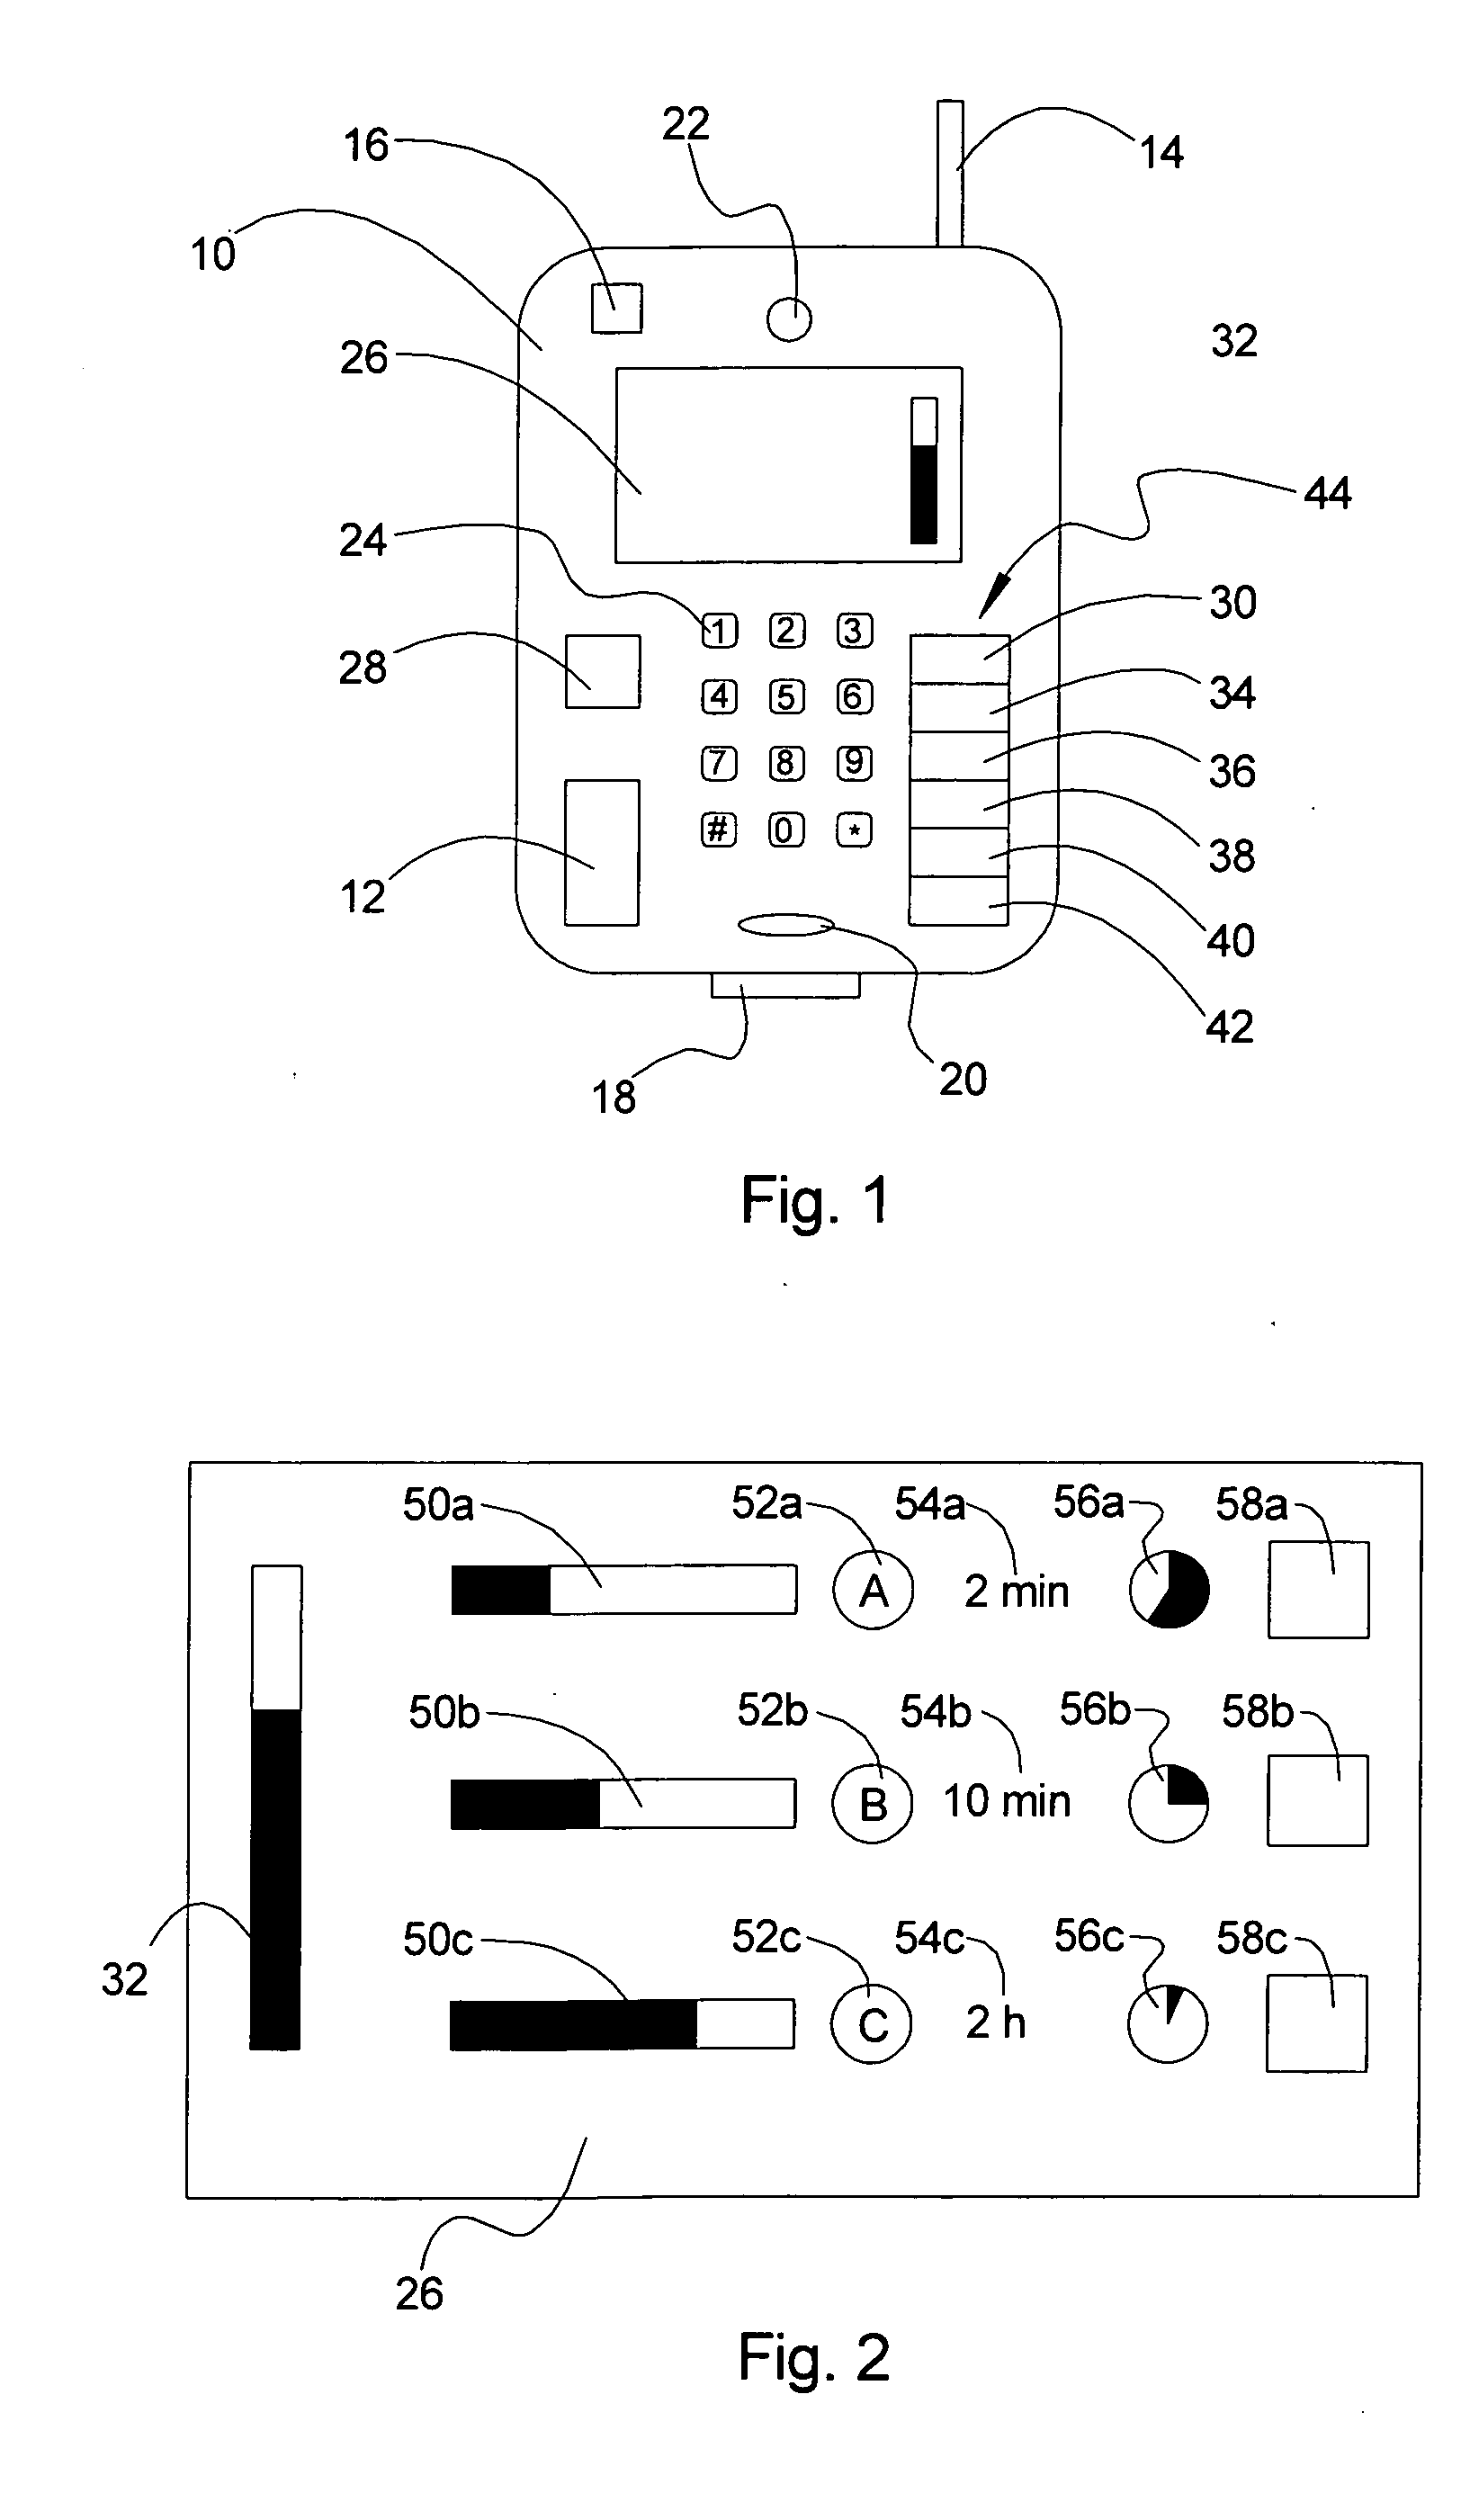 Battery charge status indicator for user terminal device